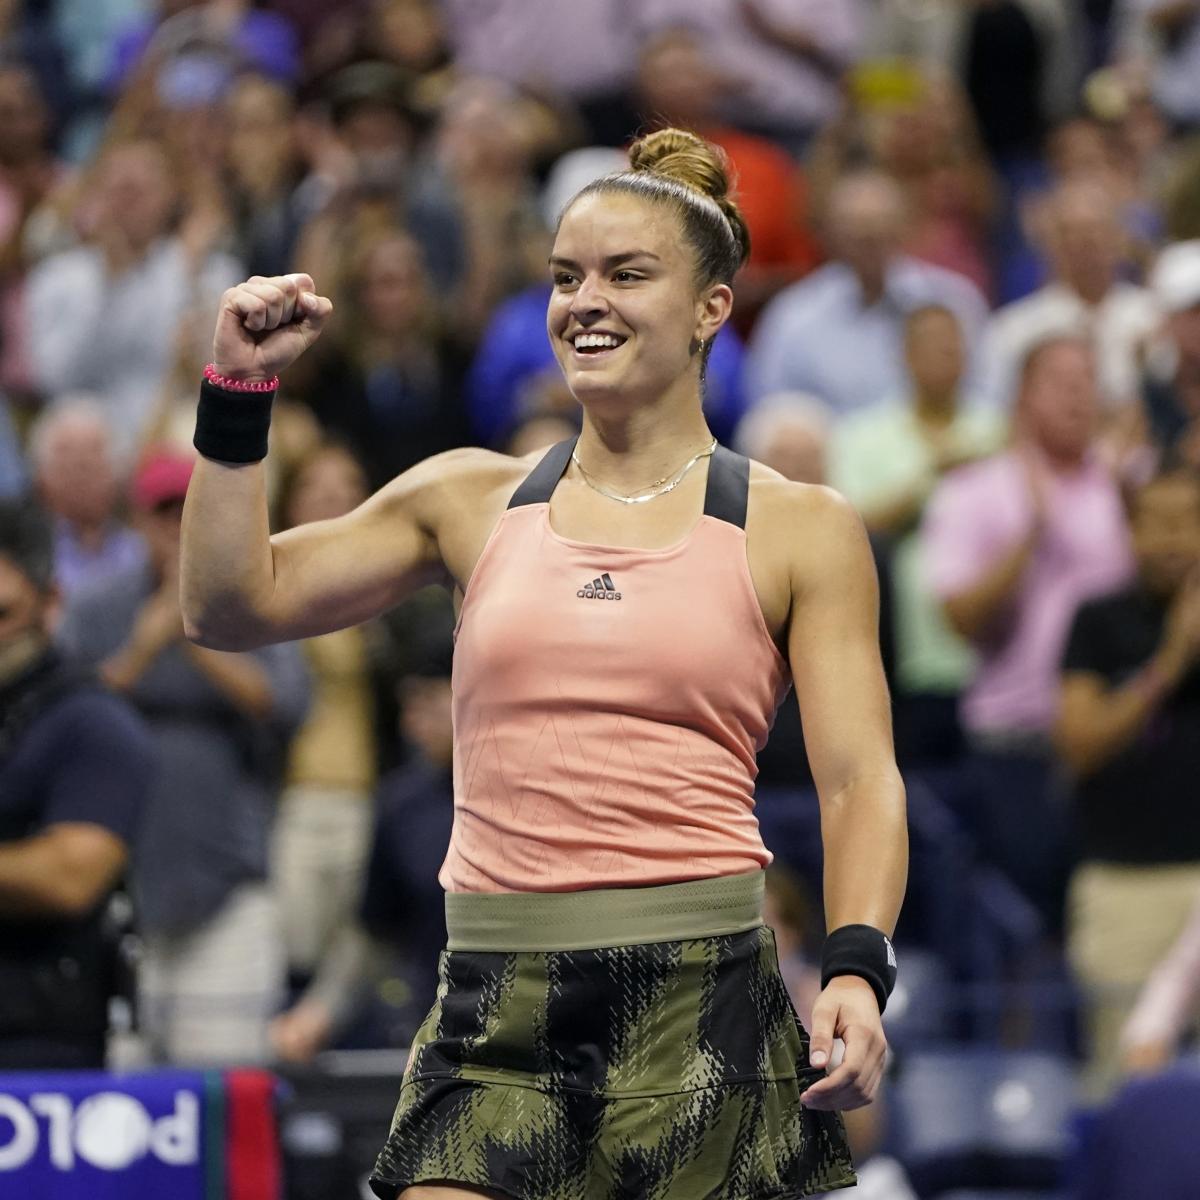 Us Open Tennis 2021 Tv Schedule And Womens Semifinal Predictions News Scores Highlights